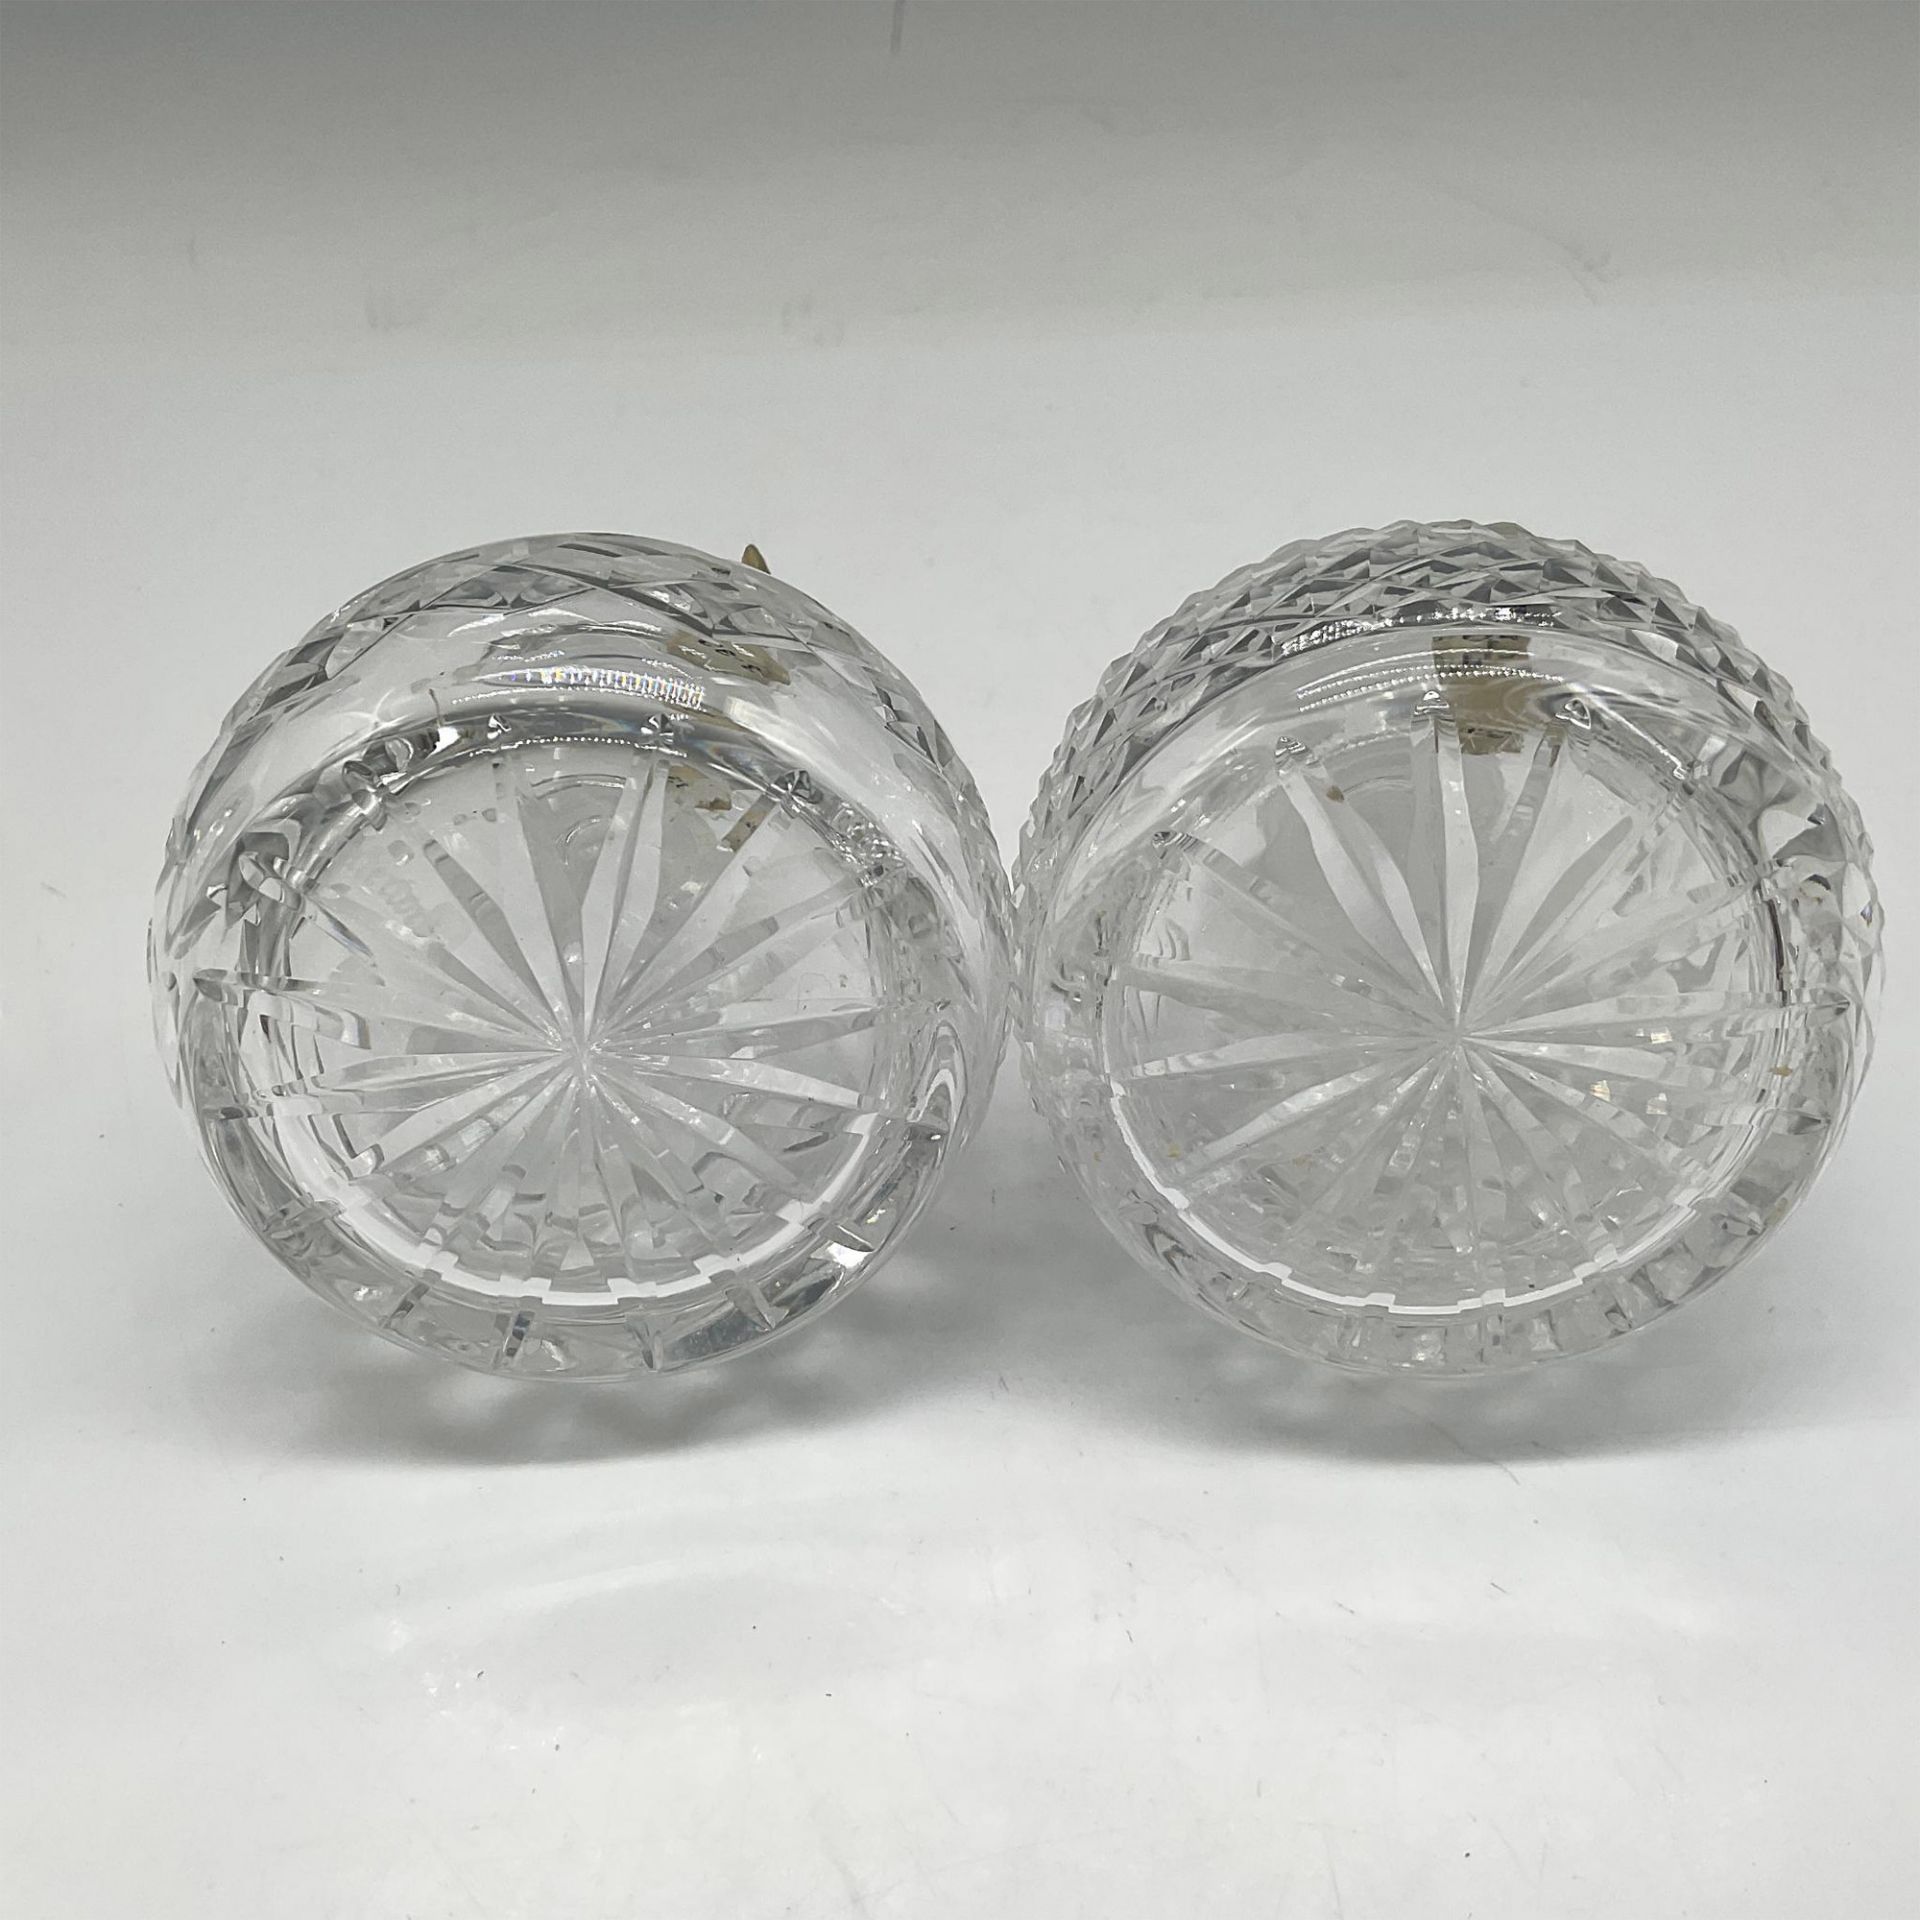 2pc Waterford Crystal Scent Bottles - Image 3 of 3